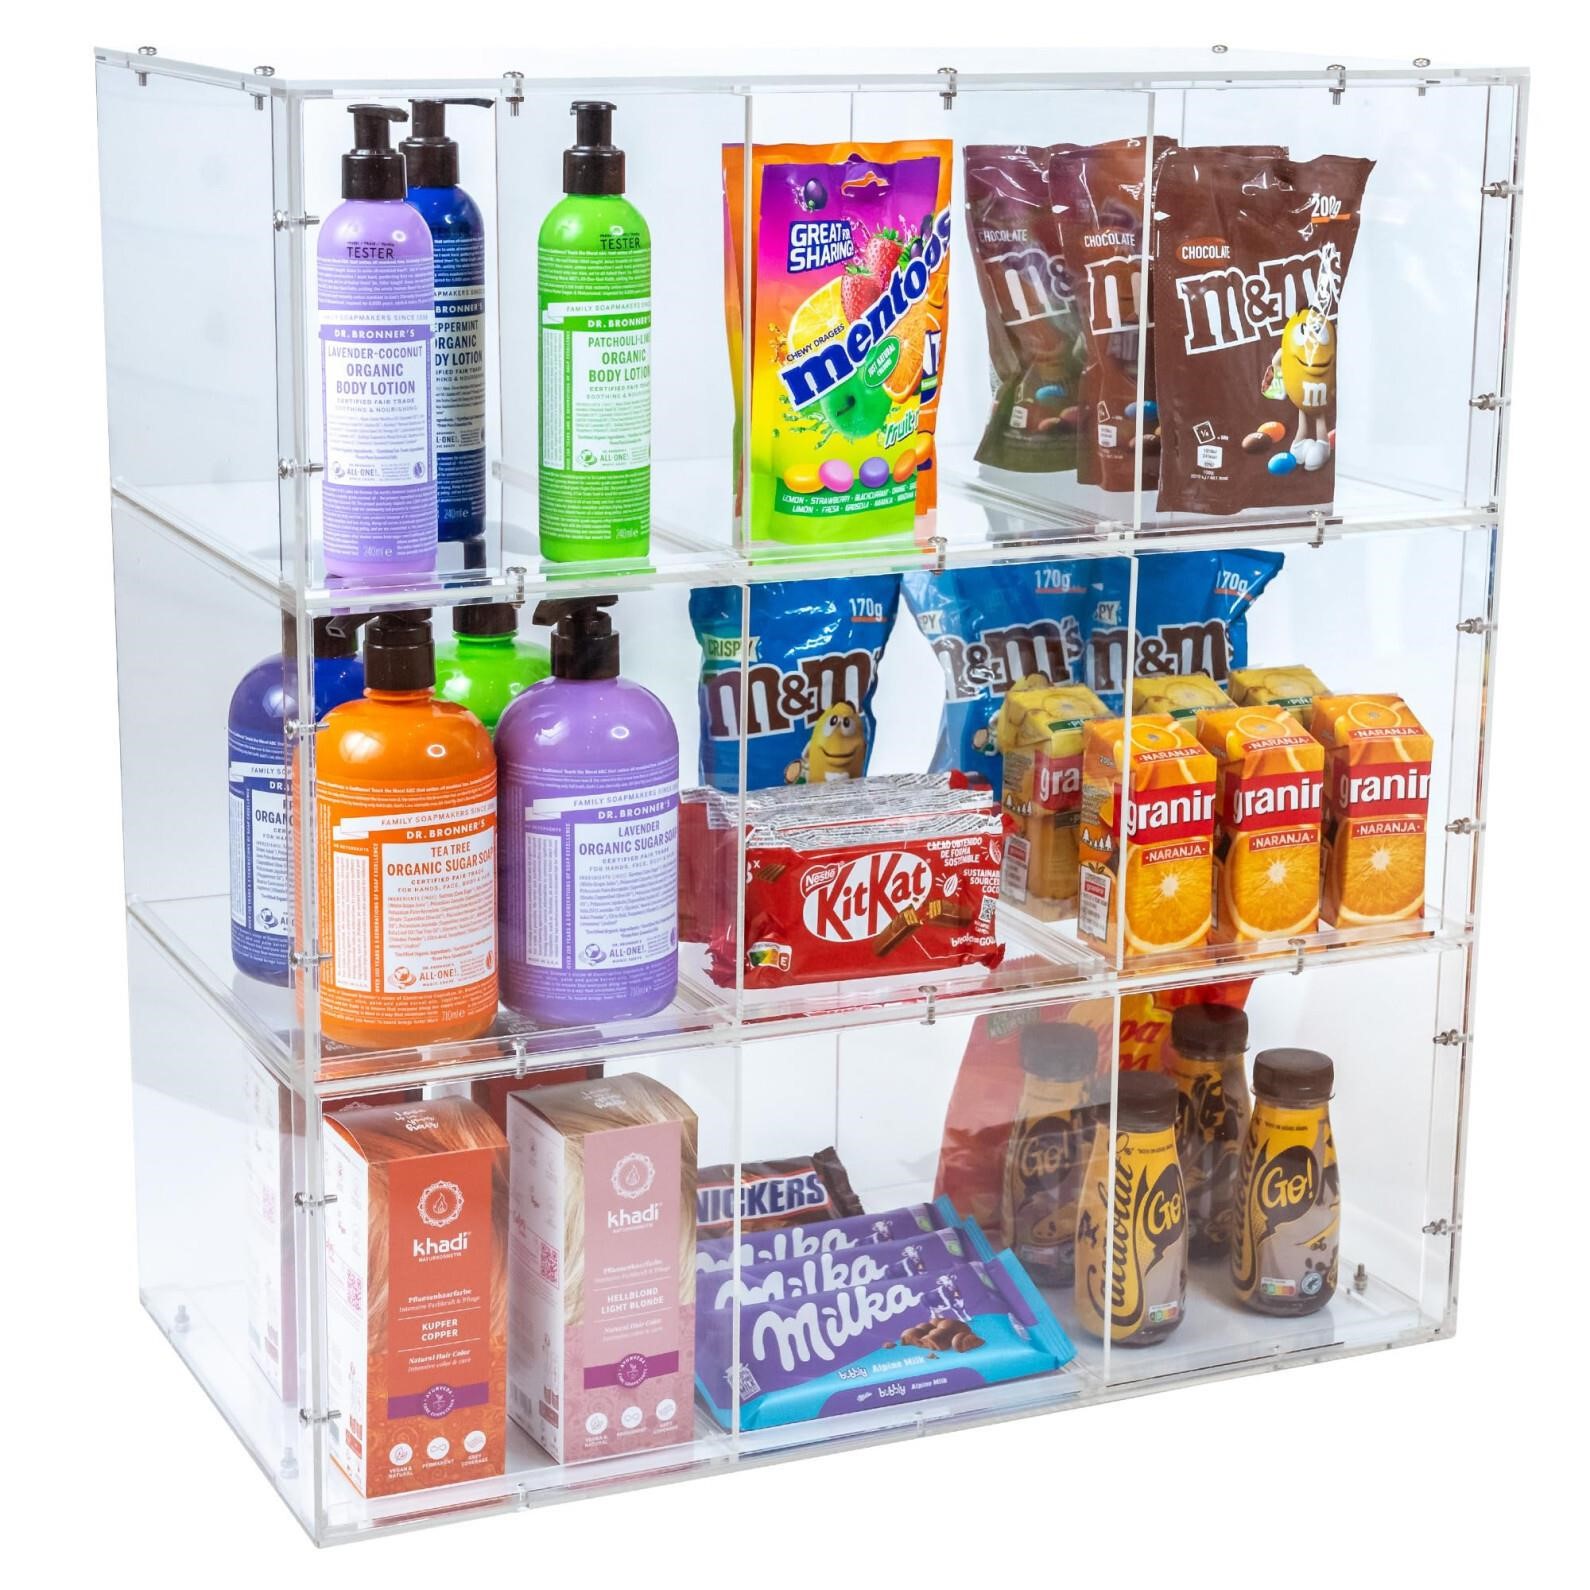 Acrylic Display Case with Shelves | Impressive Pre